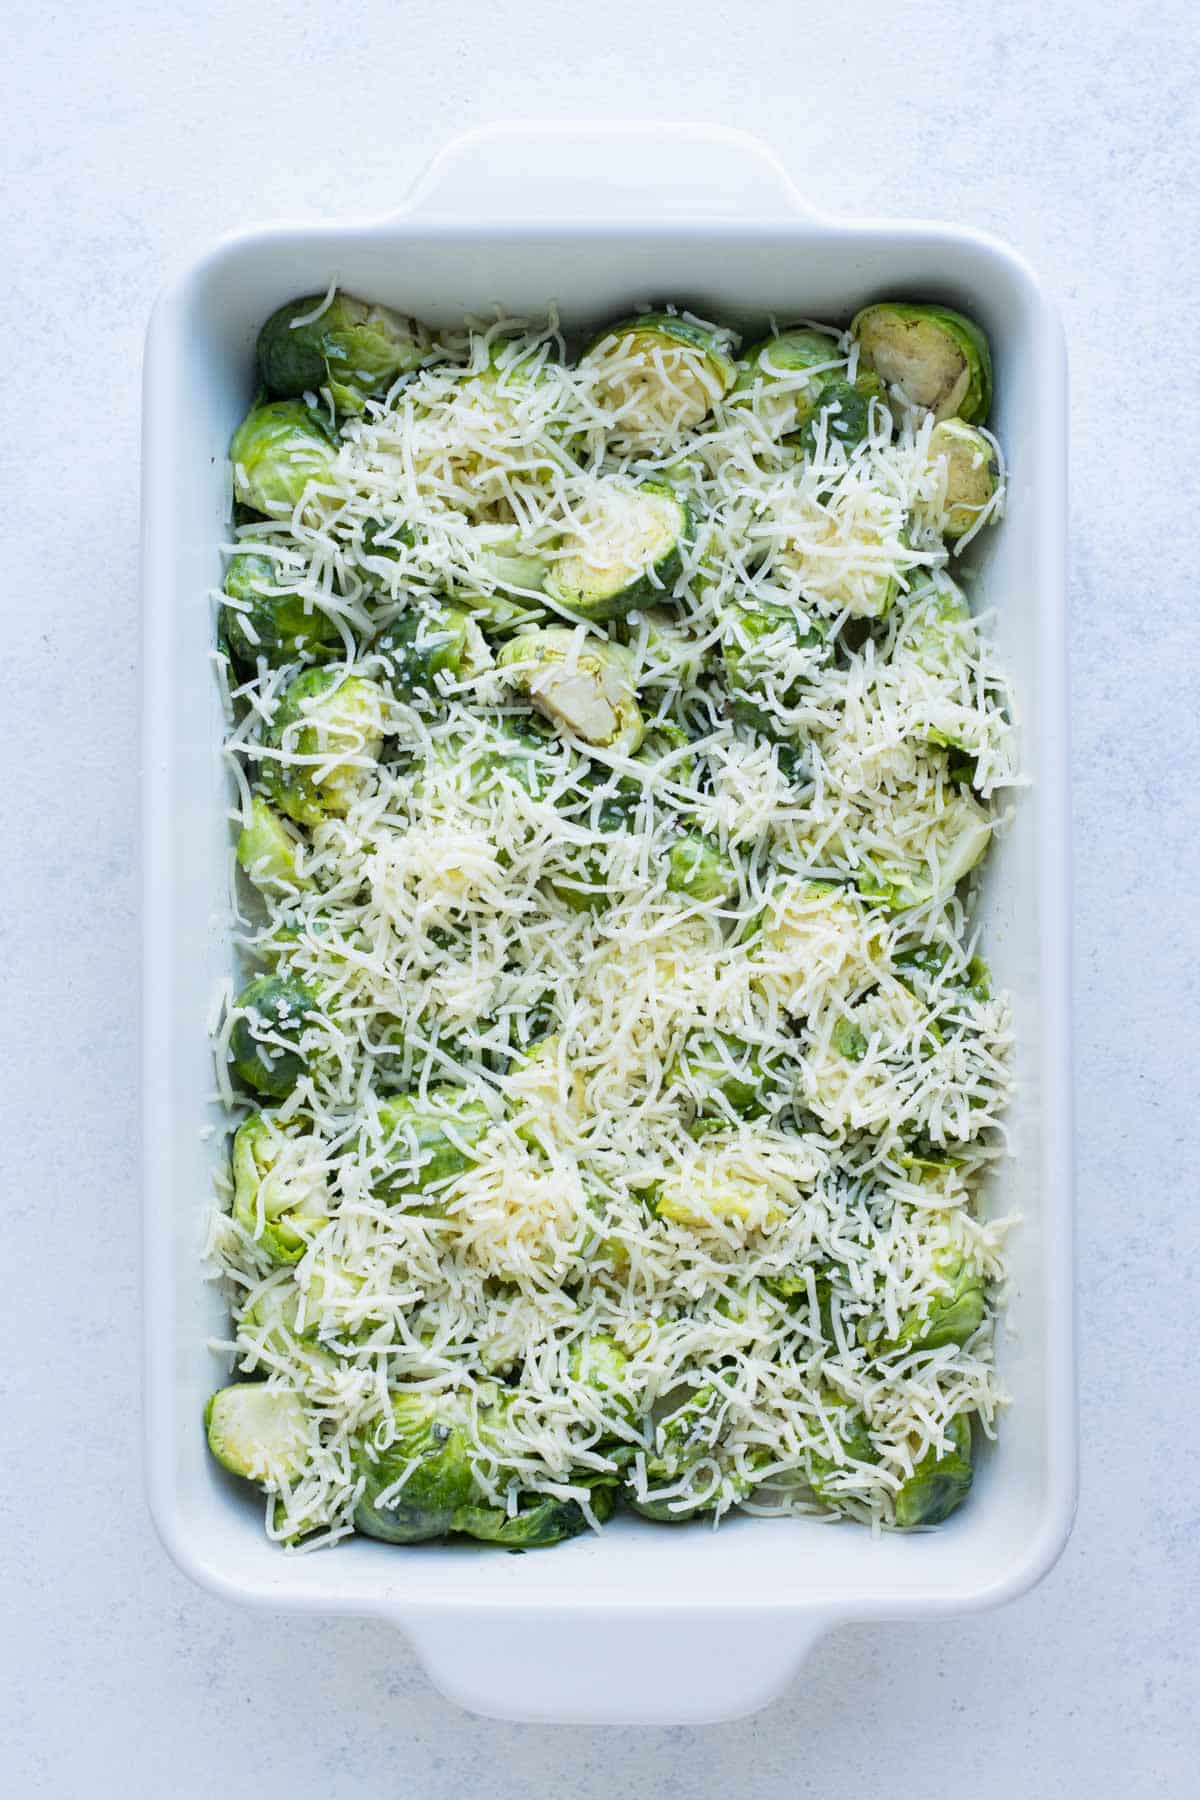 Brussels sprouts are topped with Gruyere cheese.